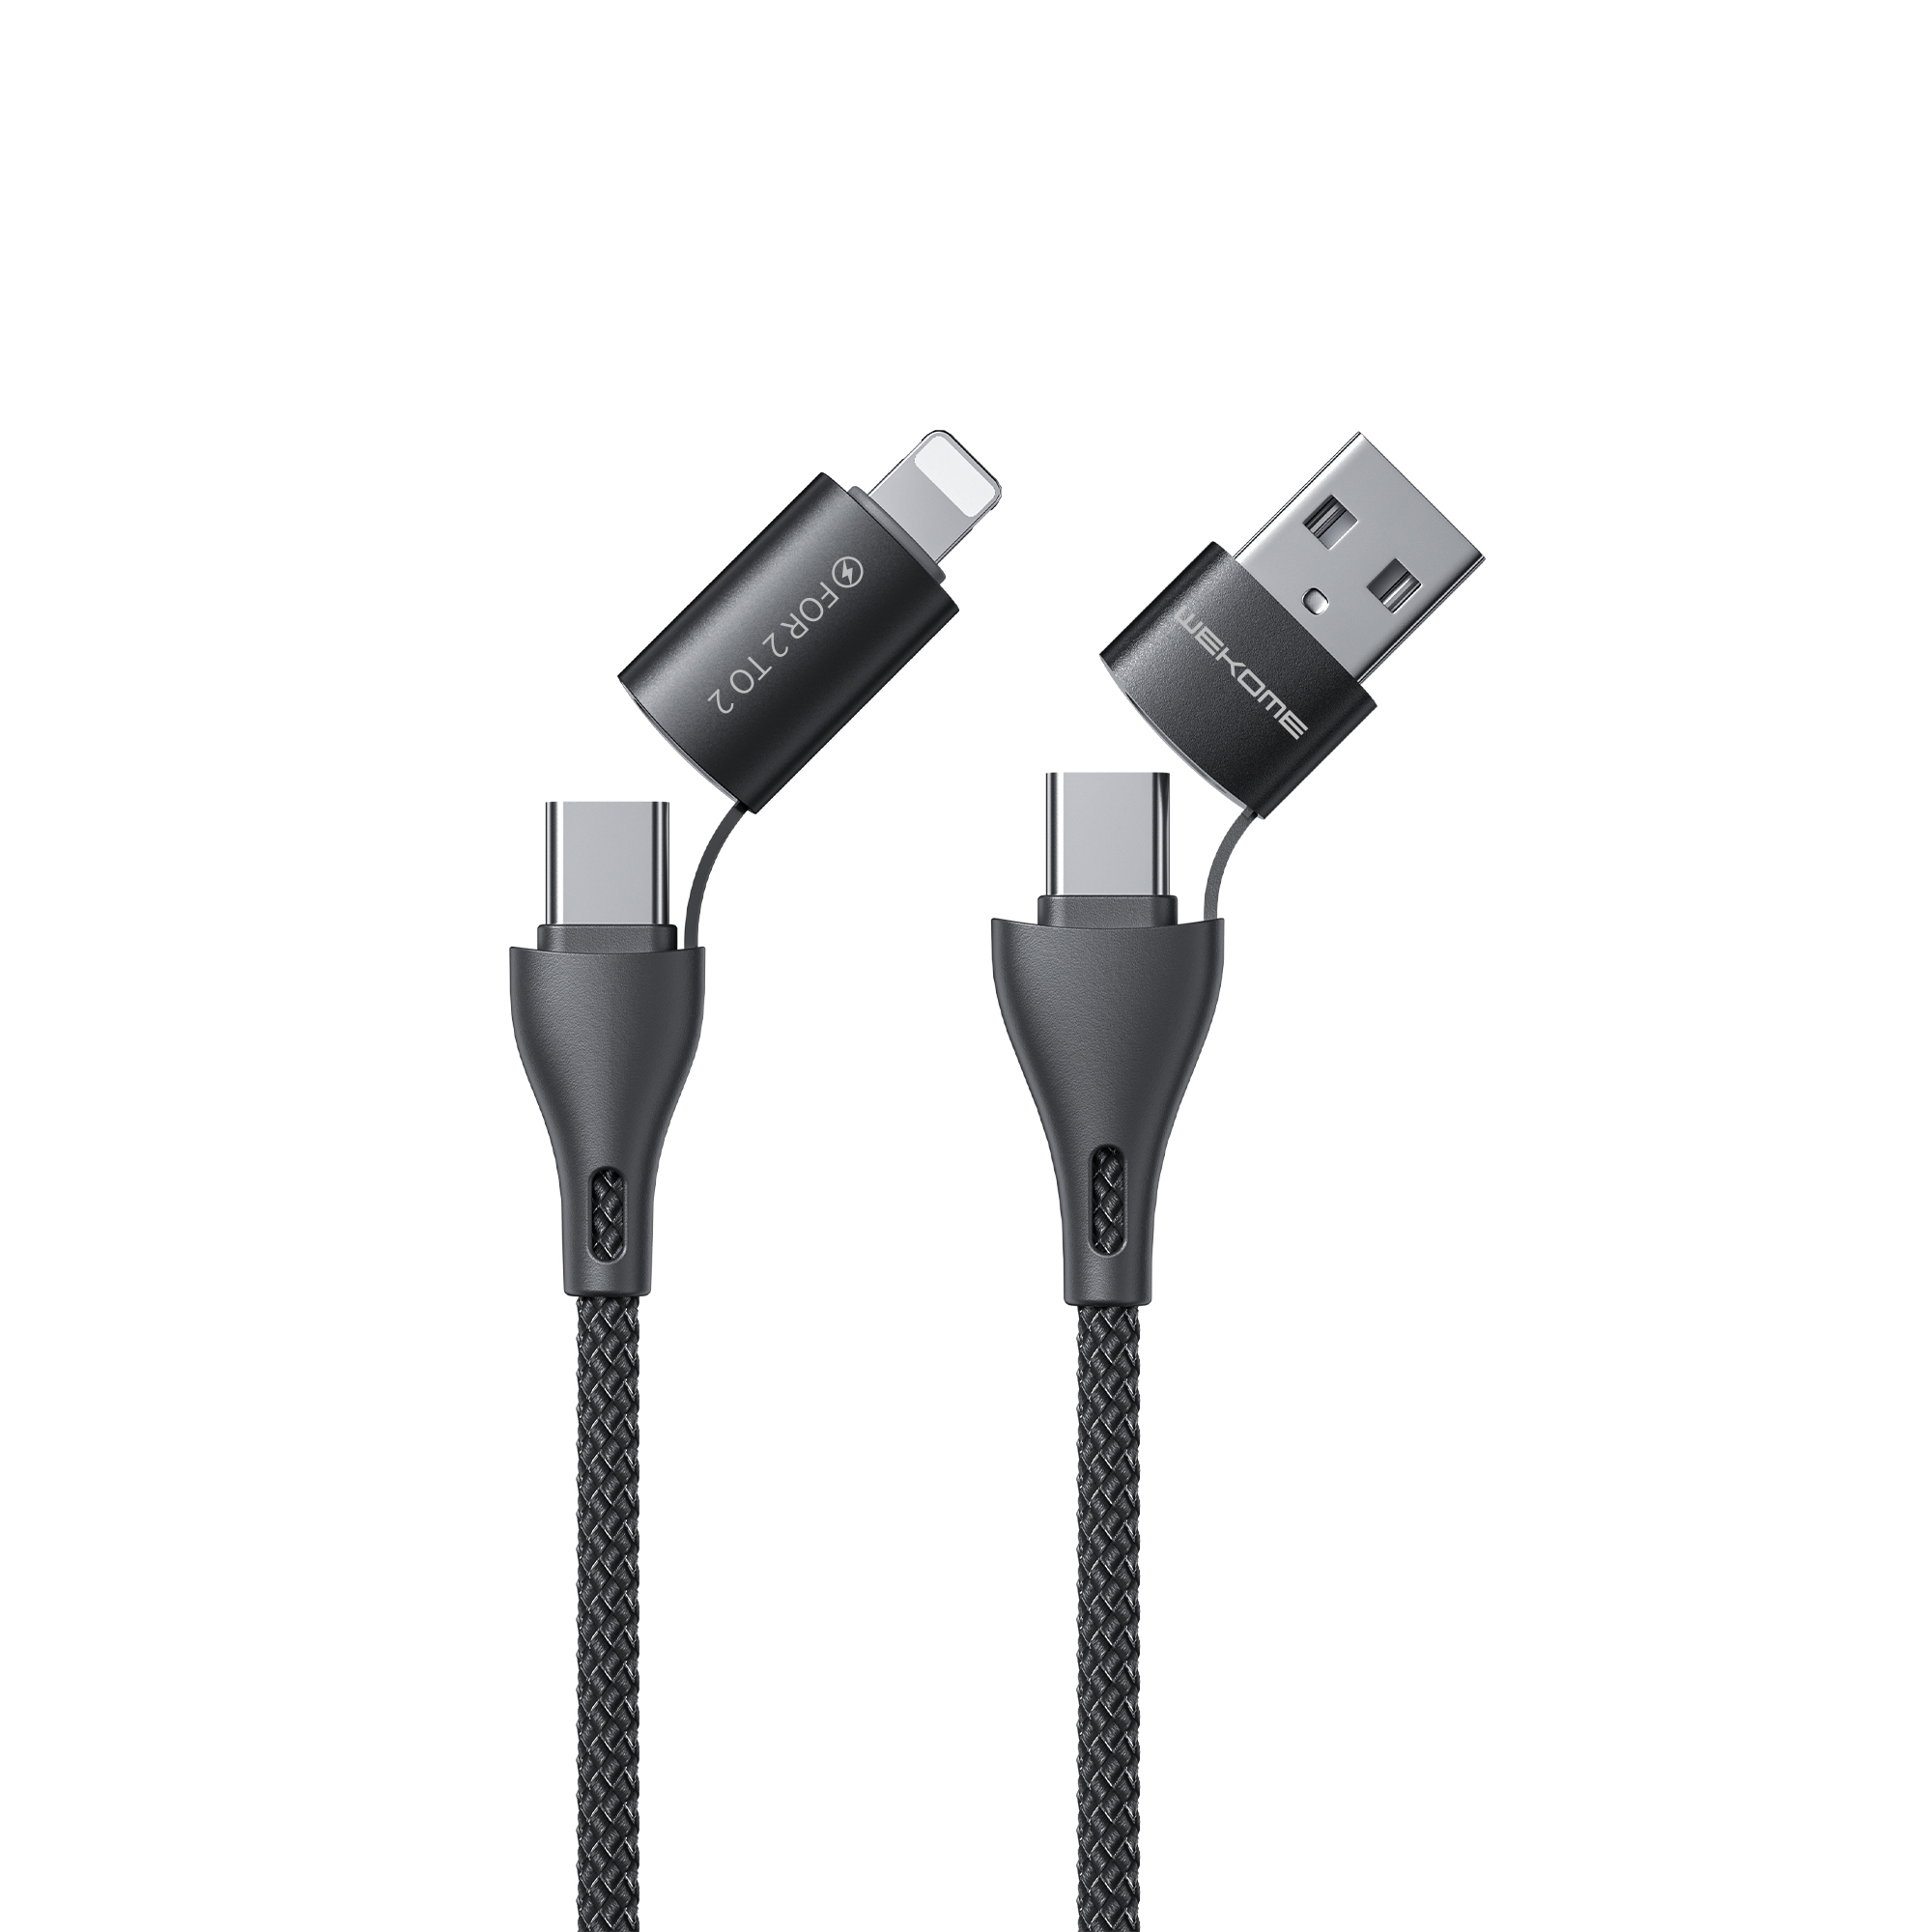 WEKOME 4 in 1 Charging Cable with Durable Fabric body